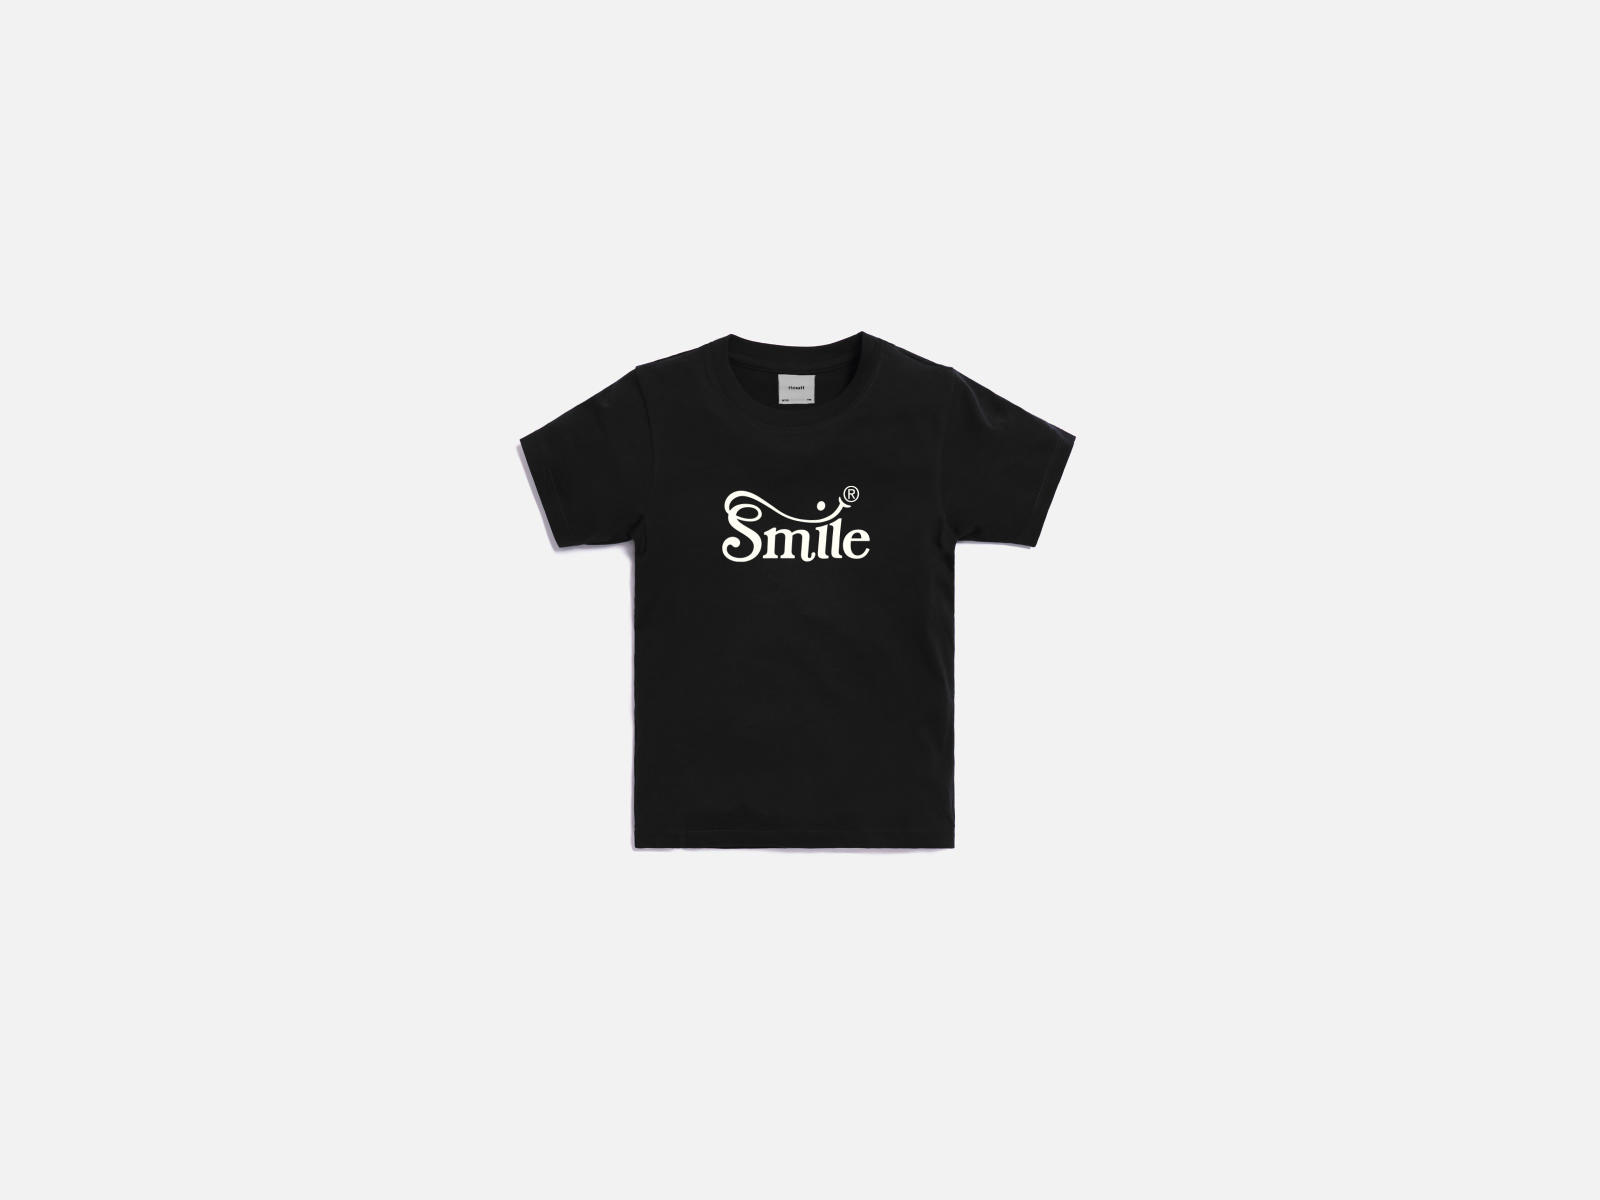 SmileのロゴがプリントされたHave a Smile® Tee for Kids フロント